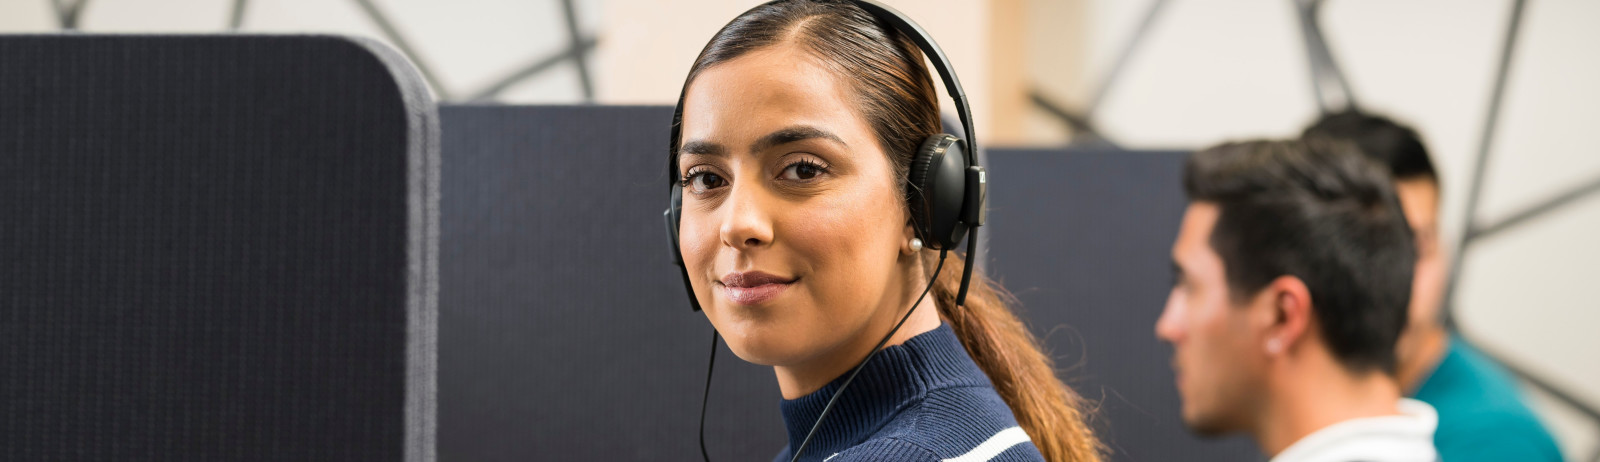 Female IELTS test taker wearing a blue turtleneck top listening to an audio clip during an IELTS on computer session